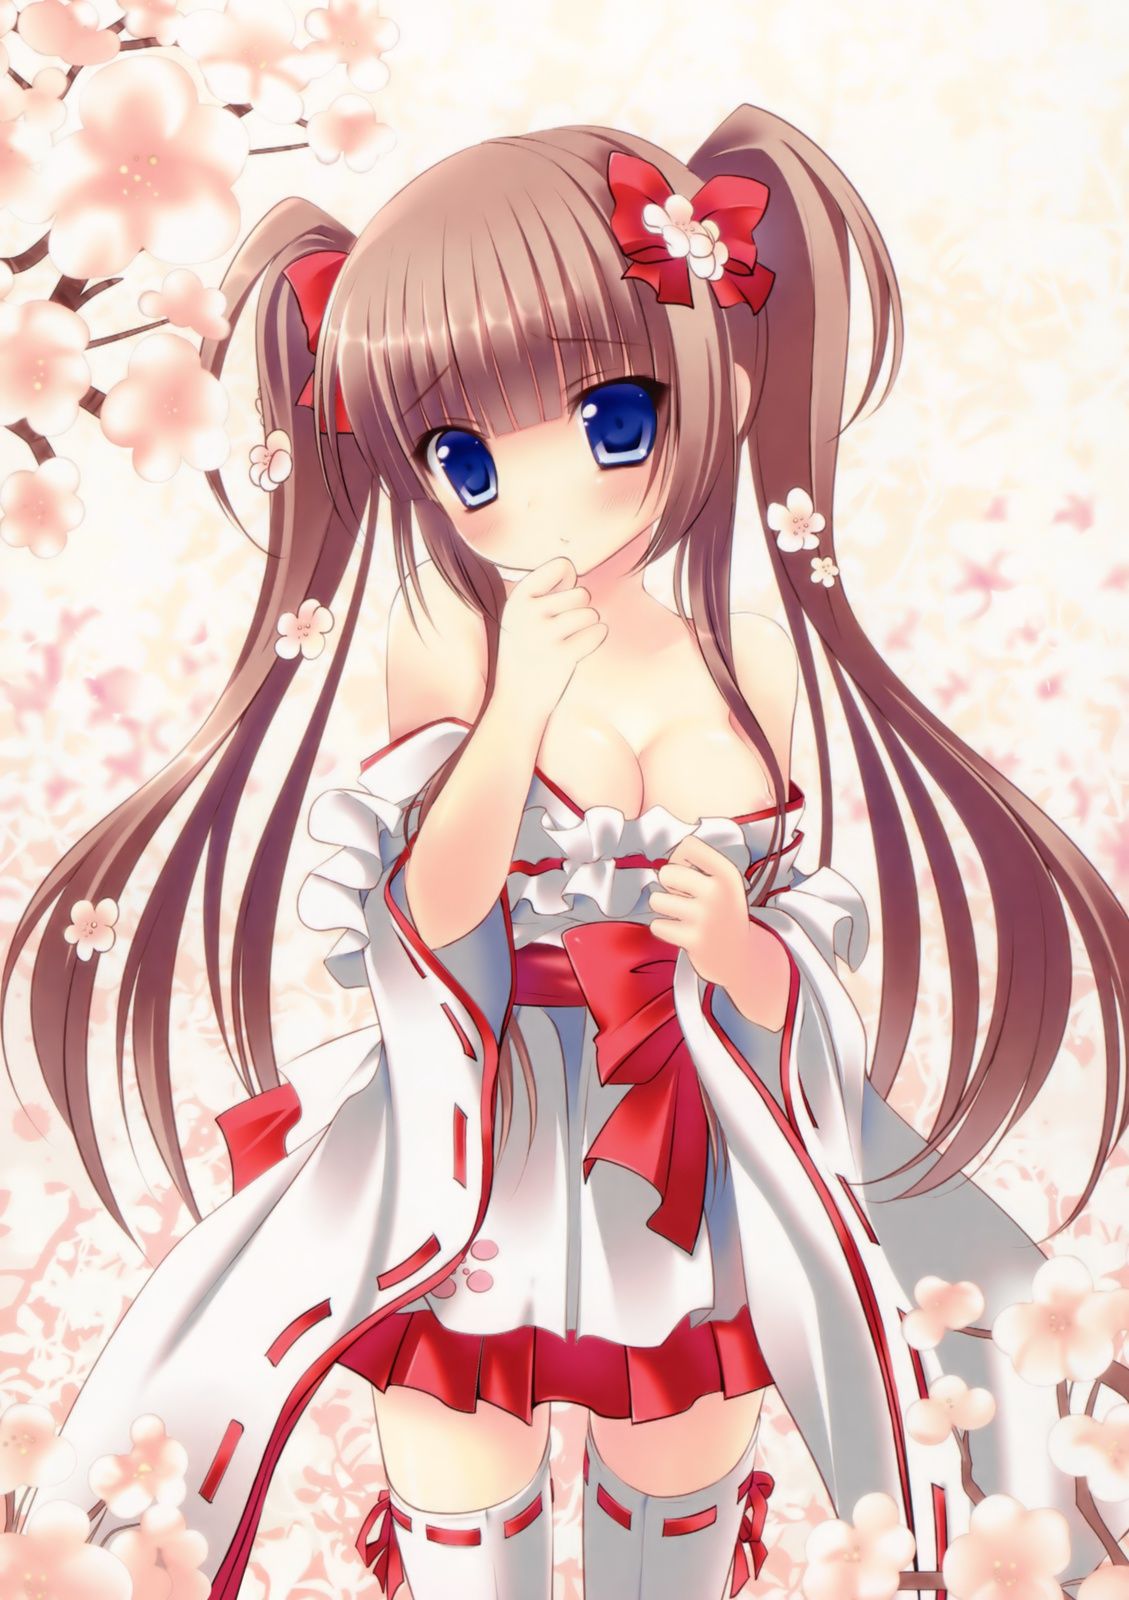 Naughty image of a cute shrine maiden! Part 4 13